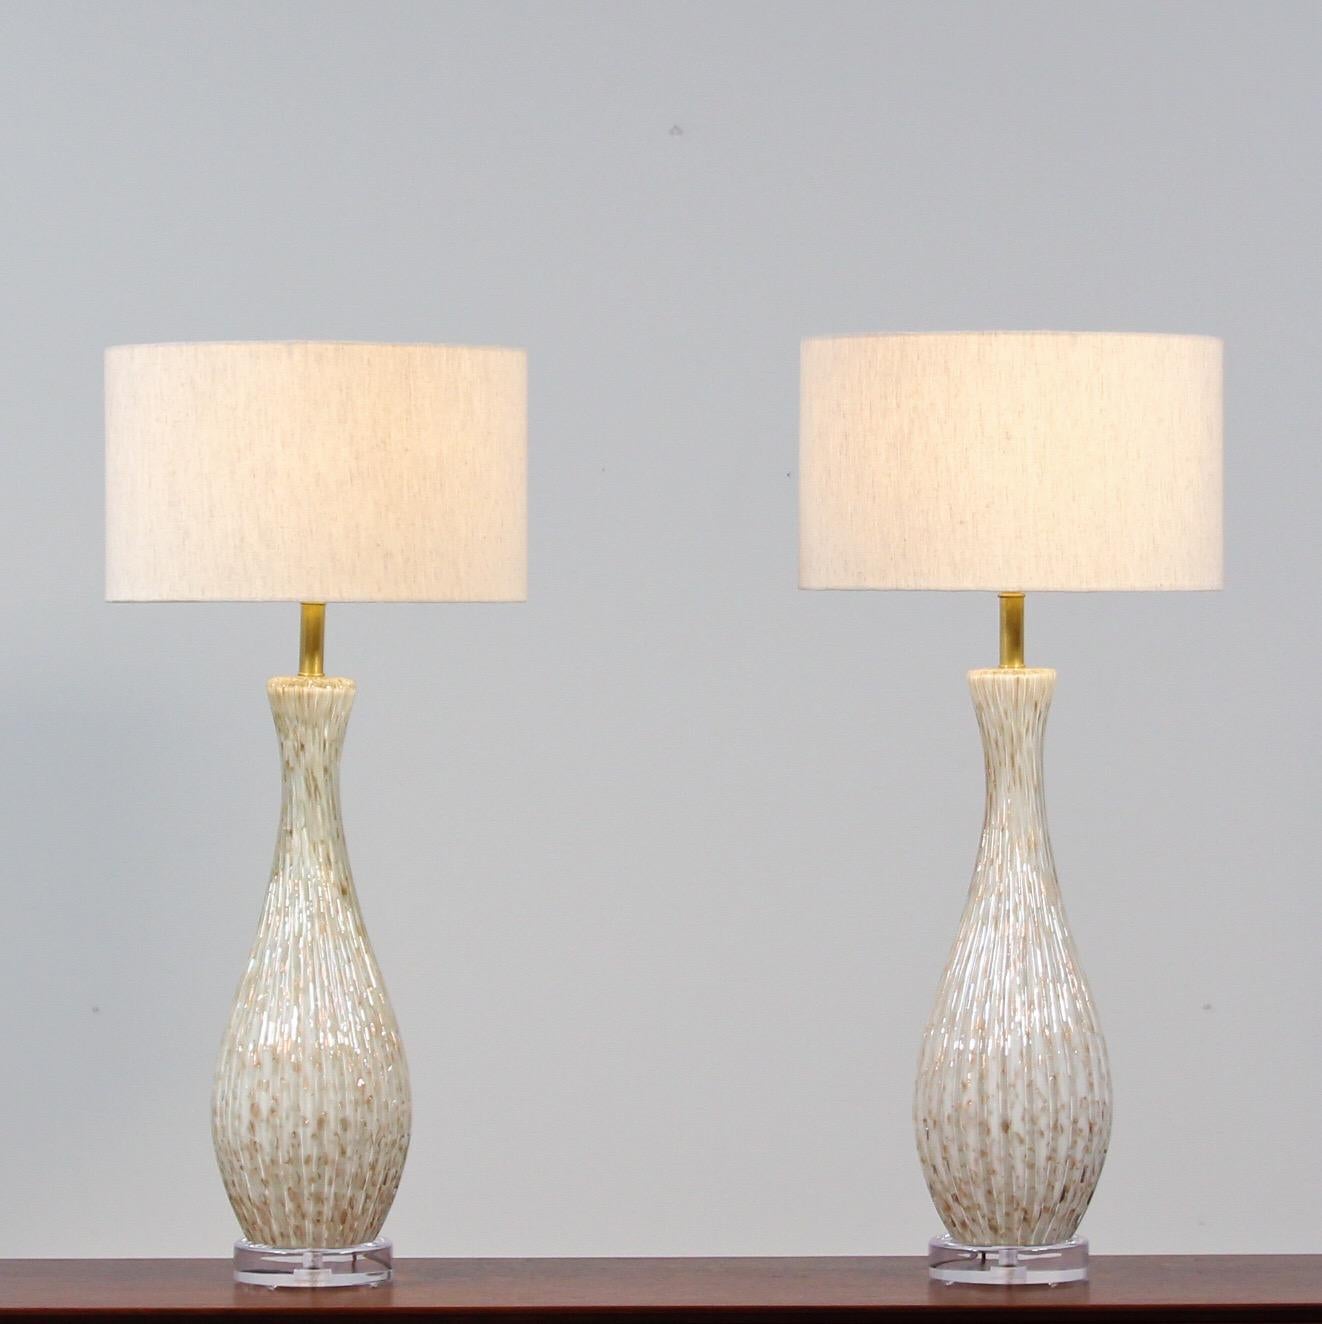 Impressive, 1950s pair of Murano glass lamps featuring a wonderful gold flecking and encased bubble (bullicante) technique on a white background by Alfredo Barbini. These beautiful lamps have been newly rewired. The brass hardware has been cleaned